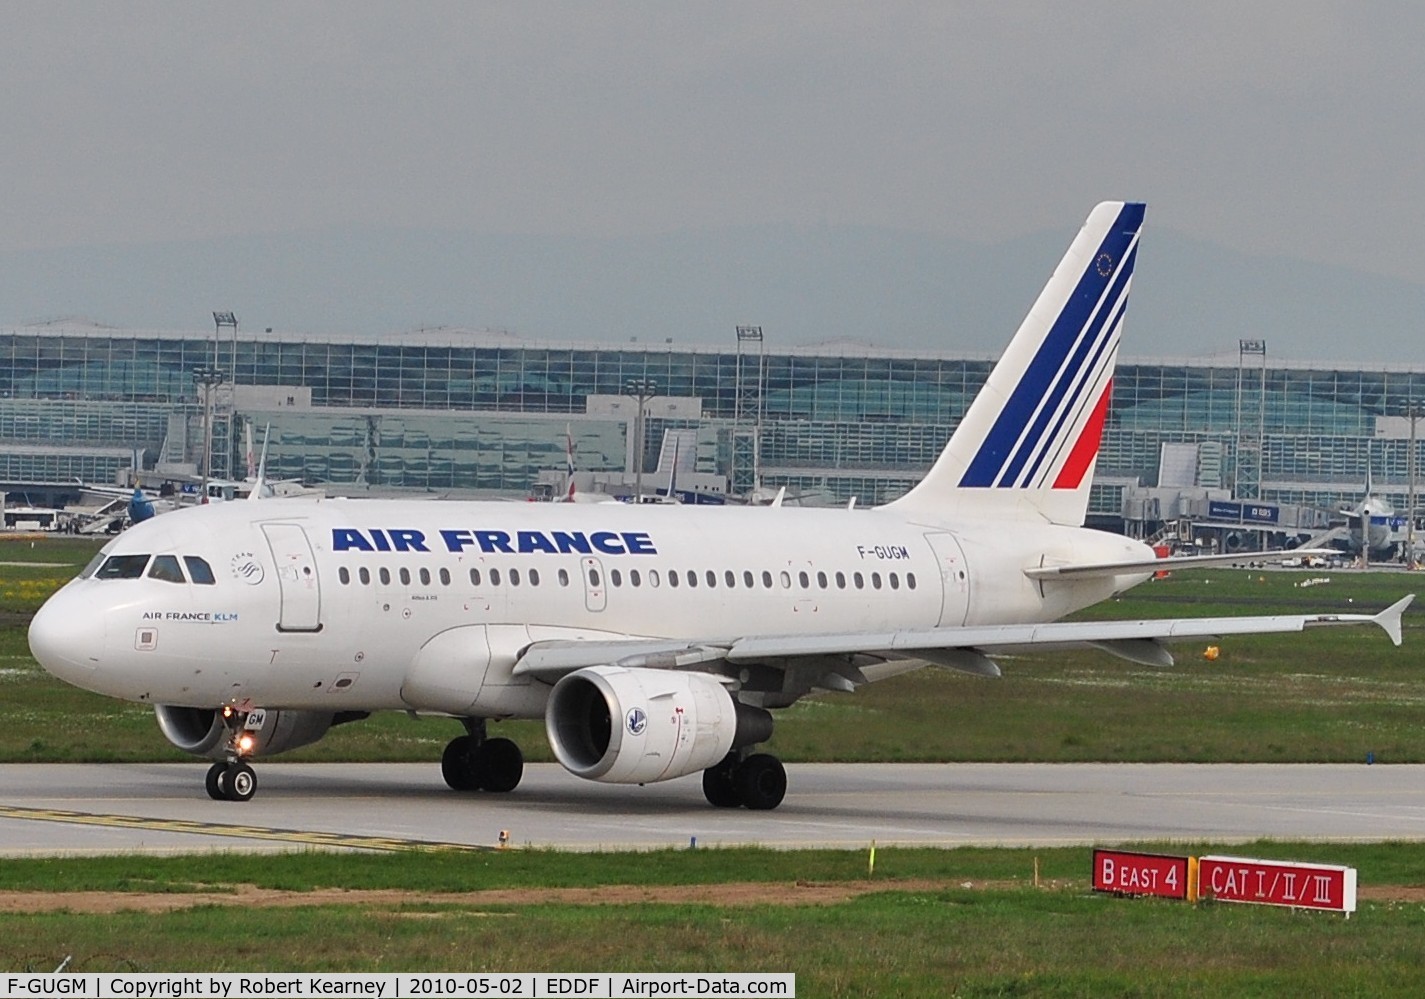 F-GUGM, 2006 Airbus A318-111 C/N 2750, Air France taxiing around the back